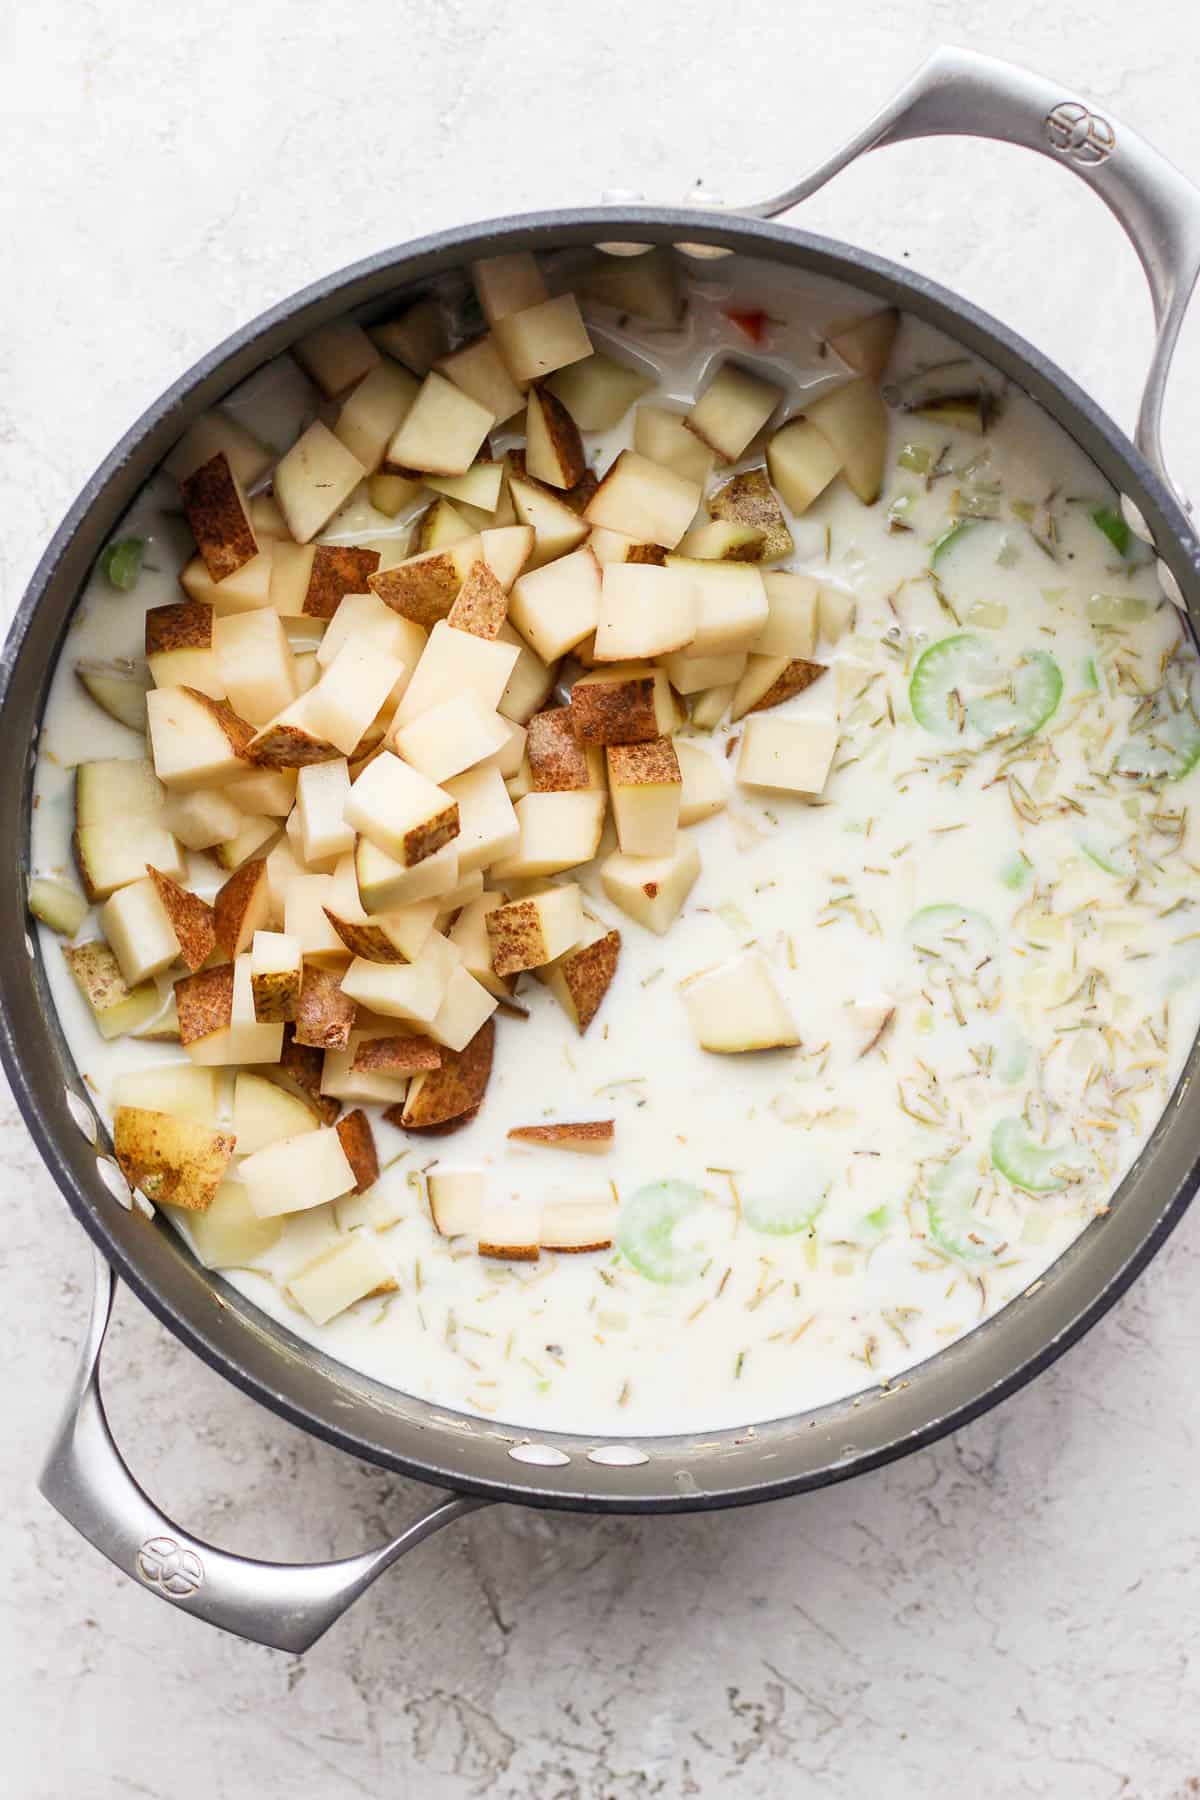 Chunks of potatoes added to the pot.